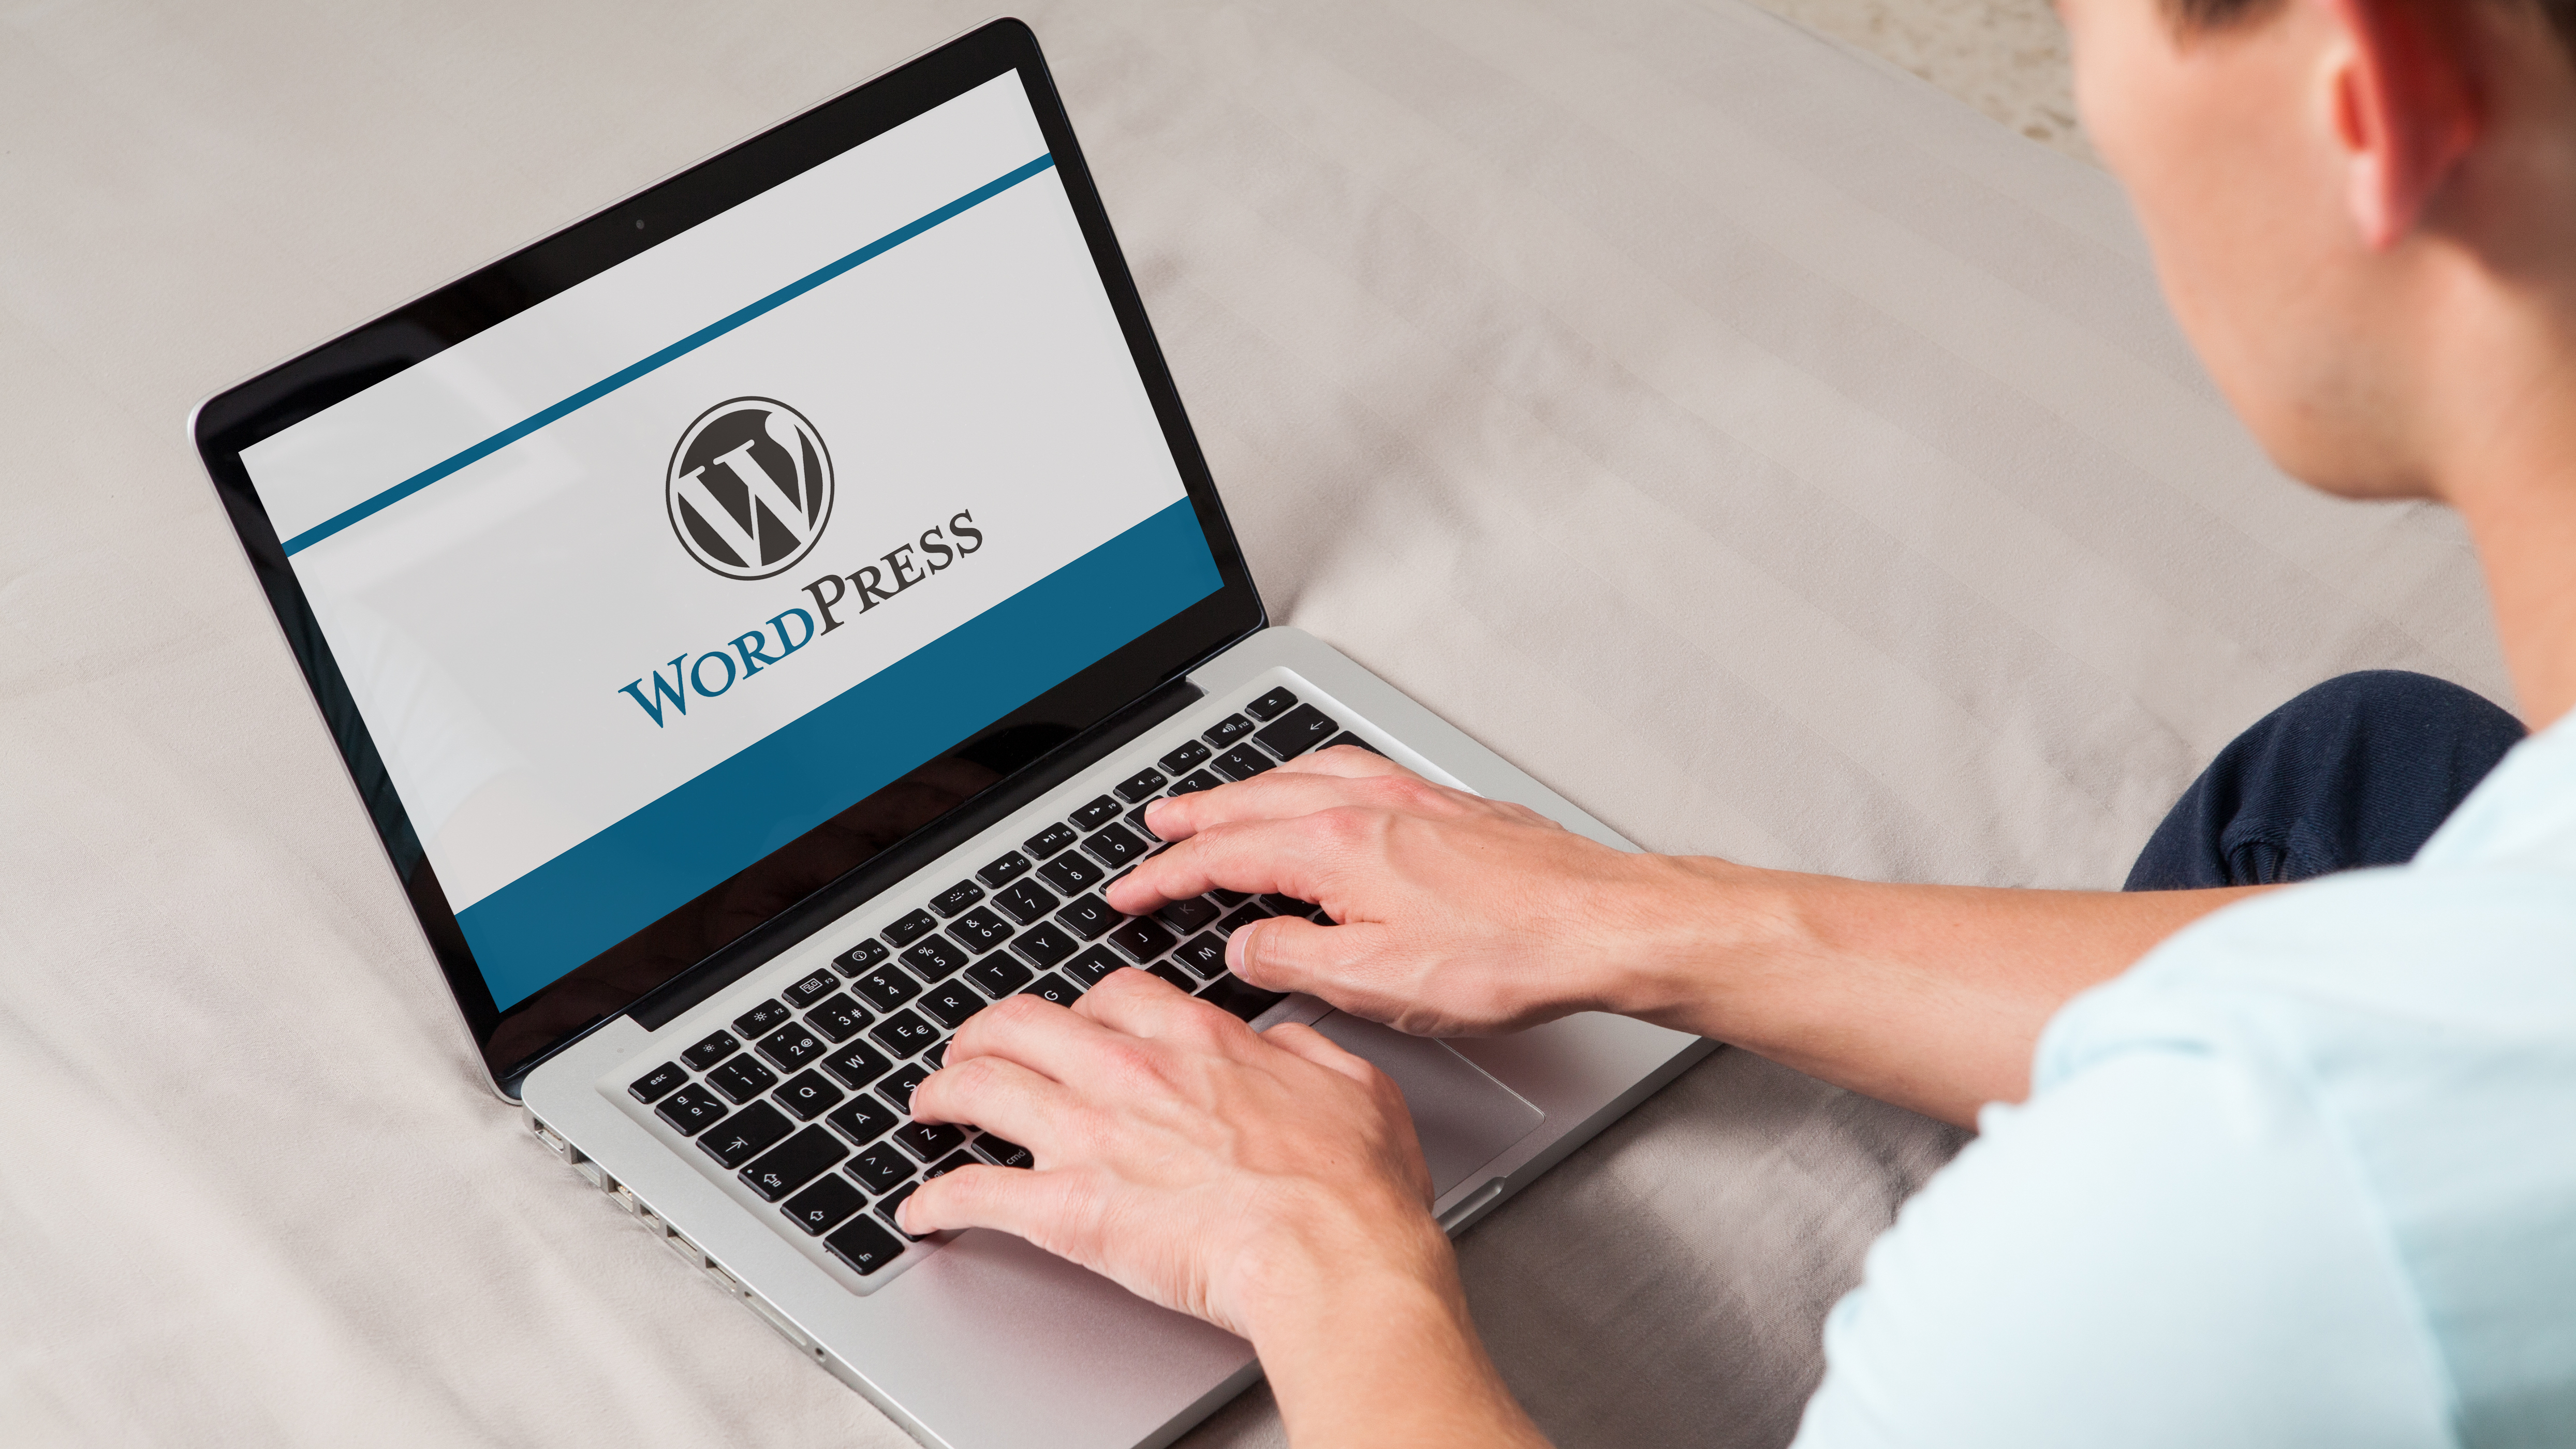 Up to 1.5 million WordPress sites could be hit by this security flaw – so patch up now